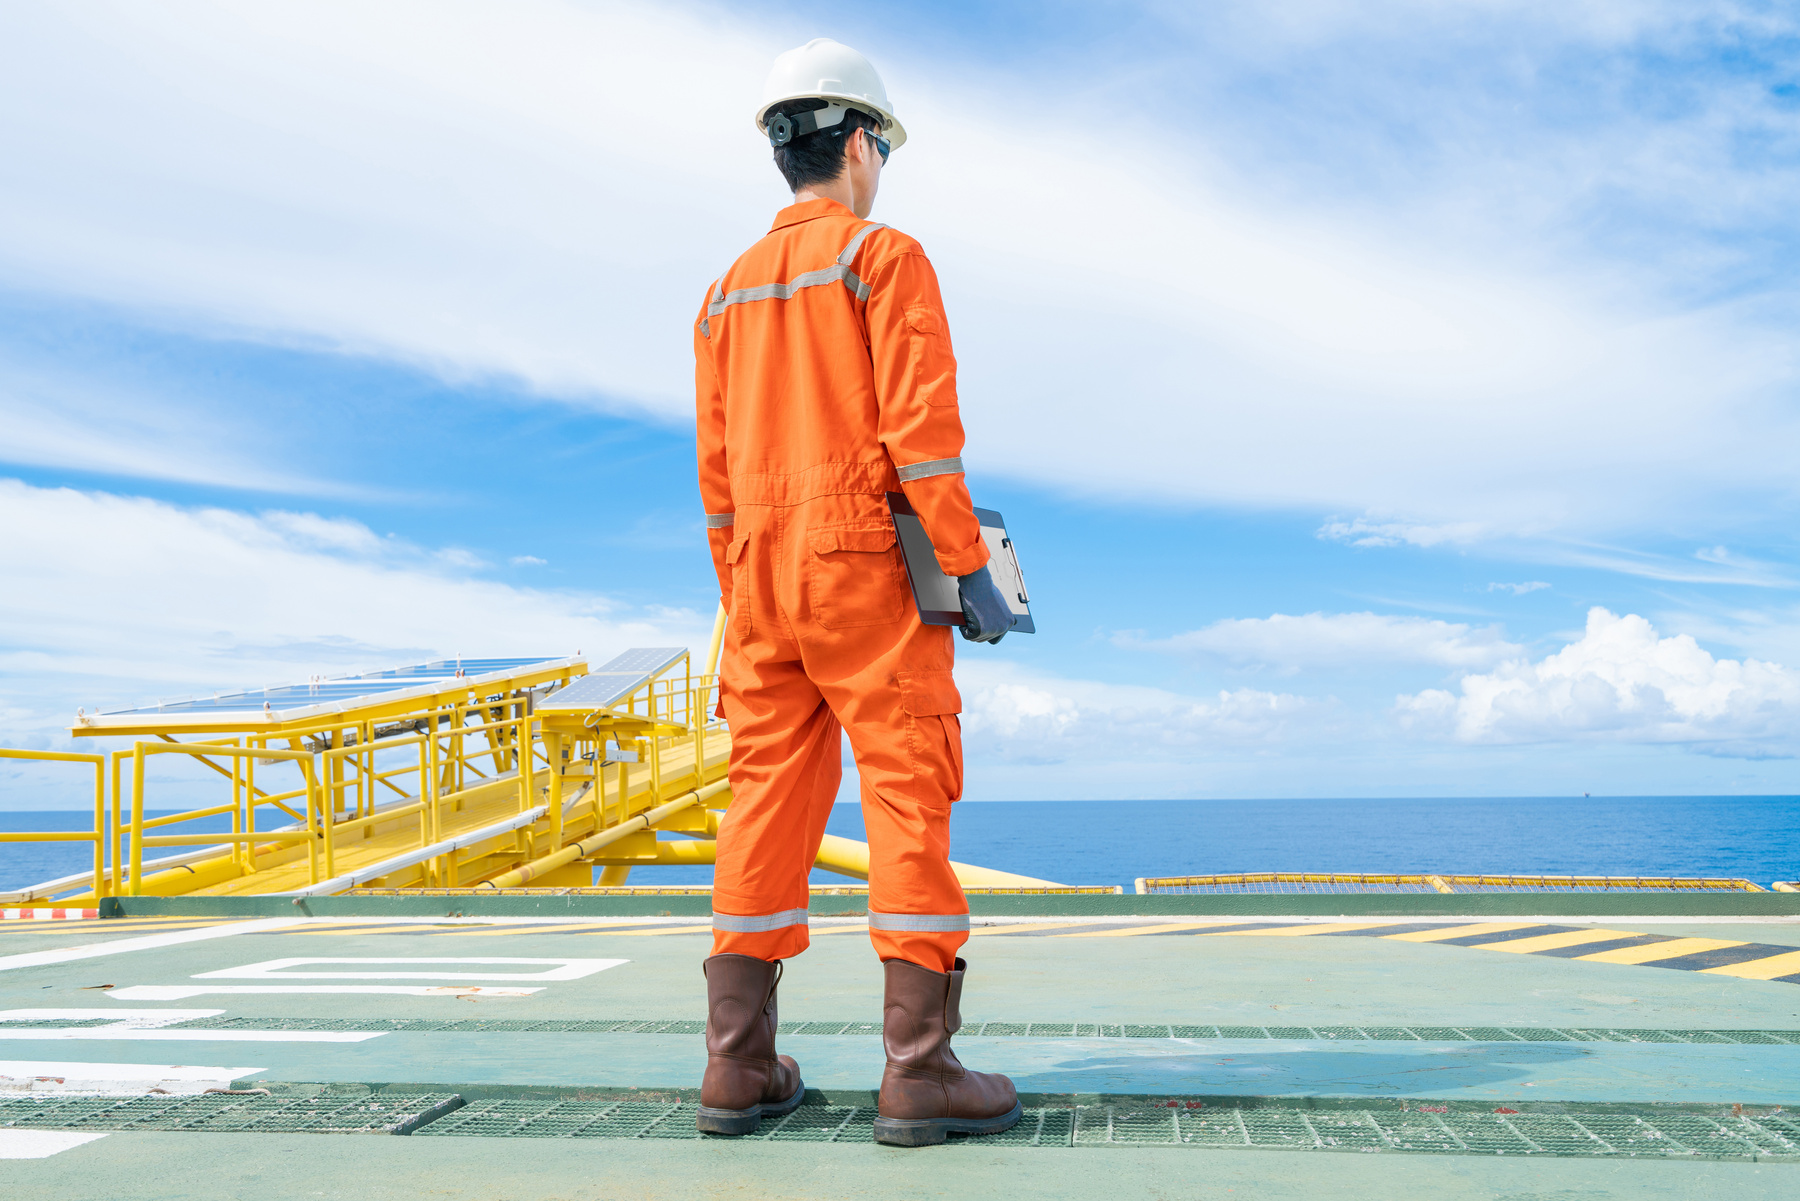 An offshore oil rig worker wearing personal protective equipment and standing on offshore wellhead remote platform.